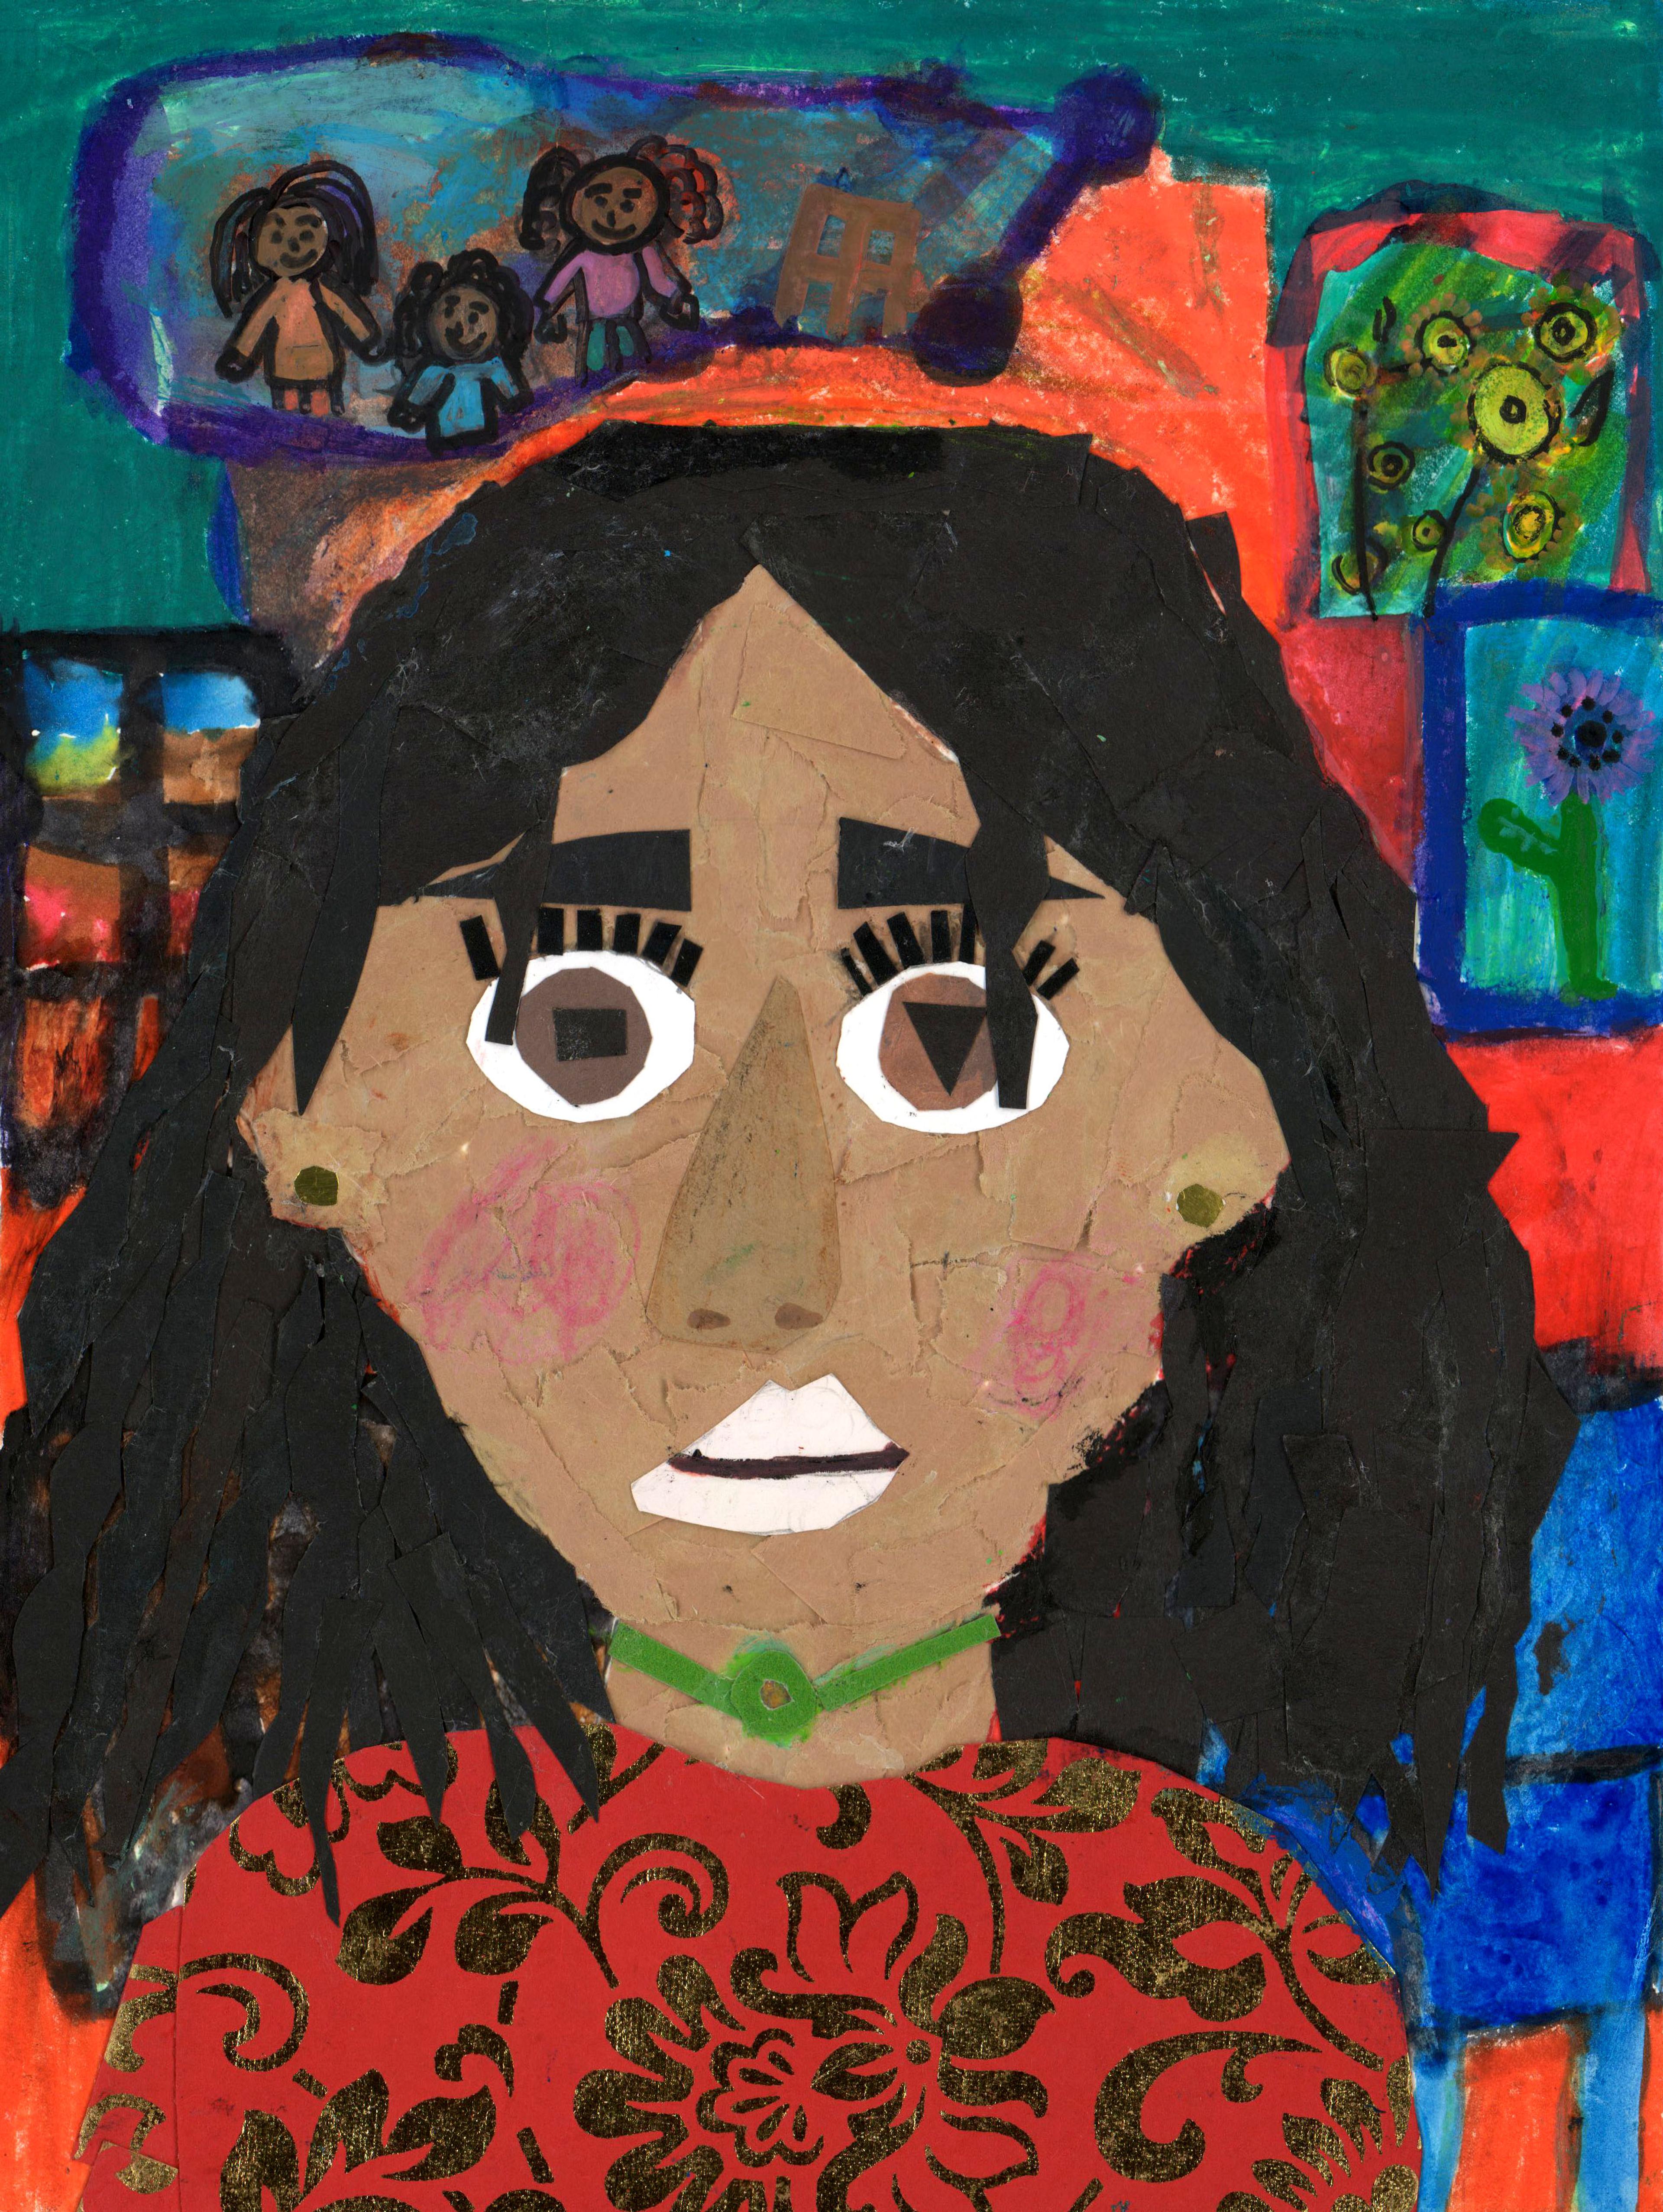 Paper collage self-portrait of young girl with light brown skin and long black hair, facing the viewer. She has thick black eyebrows and prominent black eyelashes over big brown eyes. Her lips are white, and she wears a green band around her neck and a red shirt decorated with dark floral patterns. Behind the girl are various colorful elements and patterns, including a purple flower on a green stem in a blue framed box drawn to the right. A green box above that shows a bunch of yellow flowers. Above the girl's head and to the left, three smiling girls are drawn in a blue frame, standing to the left of a brown, two-story building.